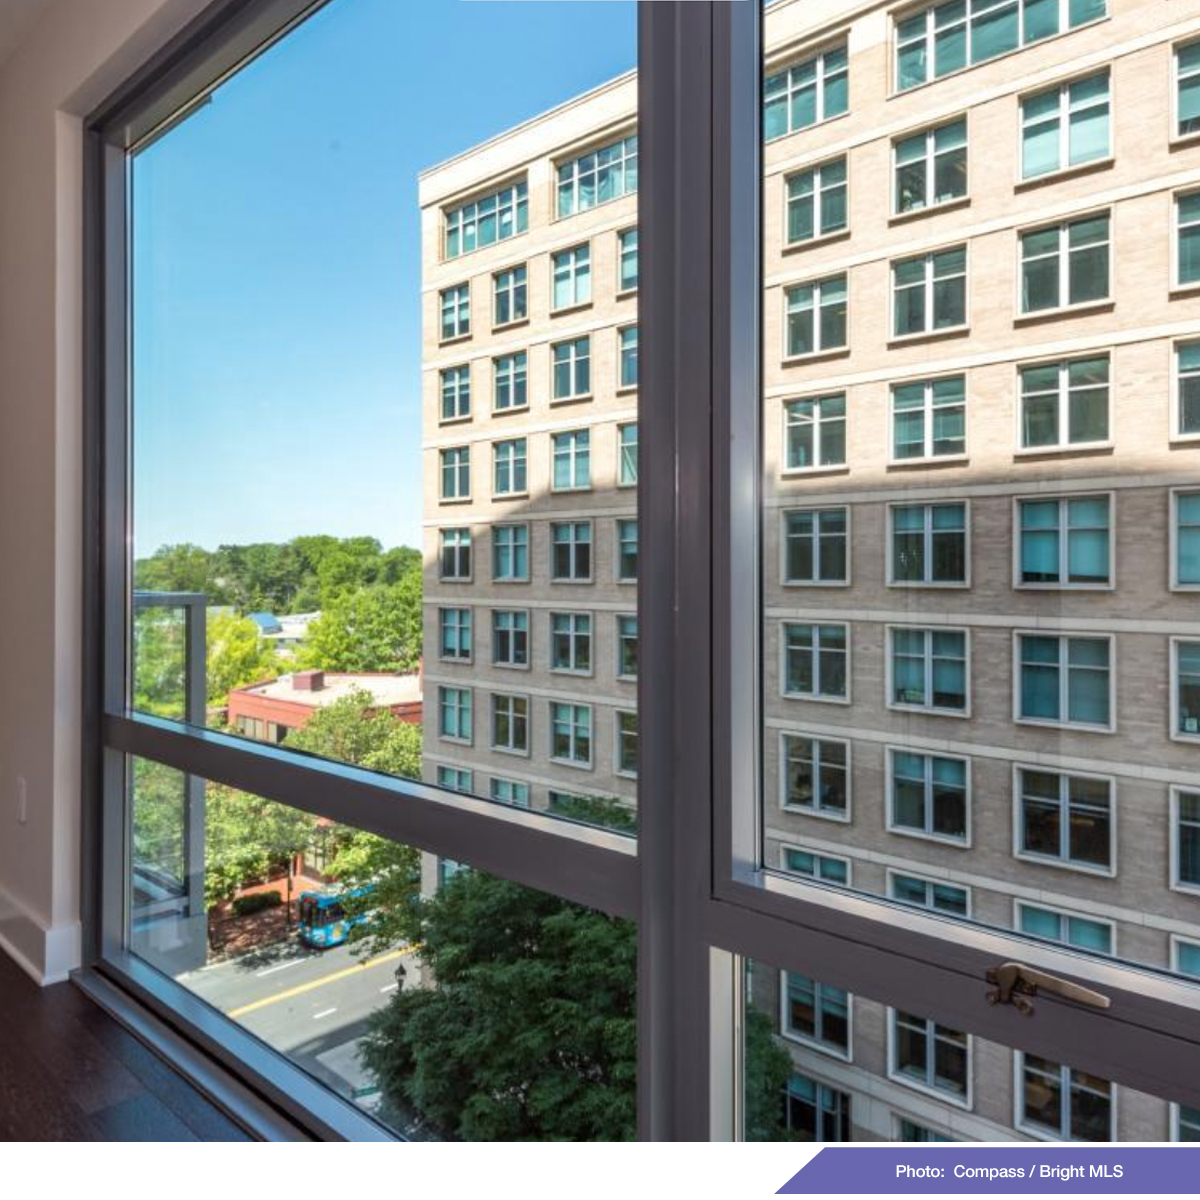 The Cheval project at 4960 fairmont in Bethesda captures the essence of the great work of our AWI team on all of our projects.
 Partners: Duball, @SKIArchitecture, Paradigm
#windowinstallation #fenestration #bethesda #architecture